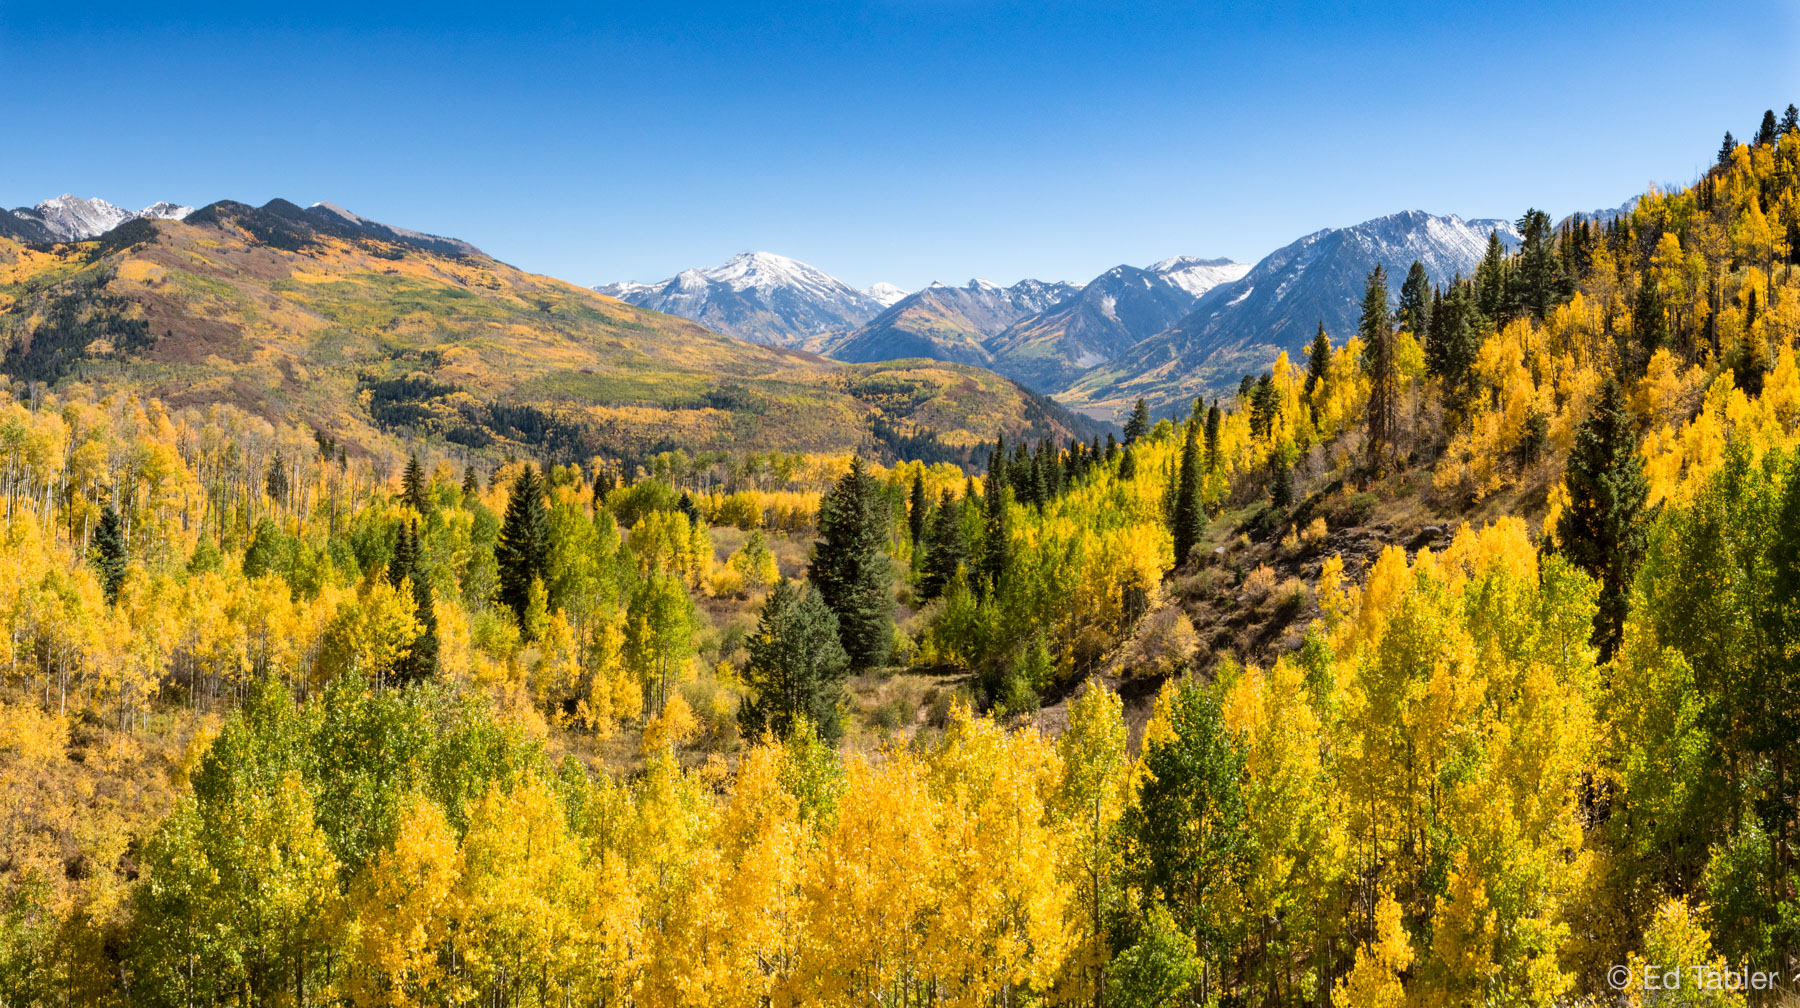 A panoramic view looking east at the Maroon Bells - Snowmass Wilderness from McClure Pass.